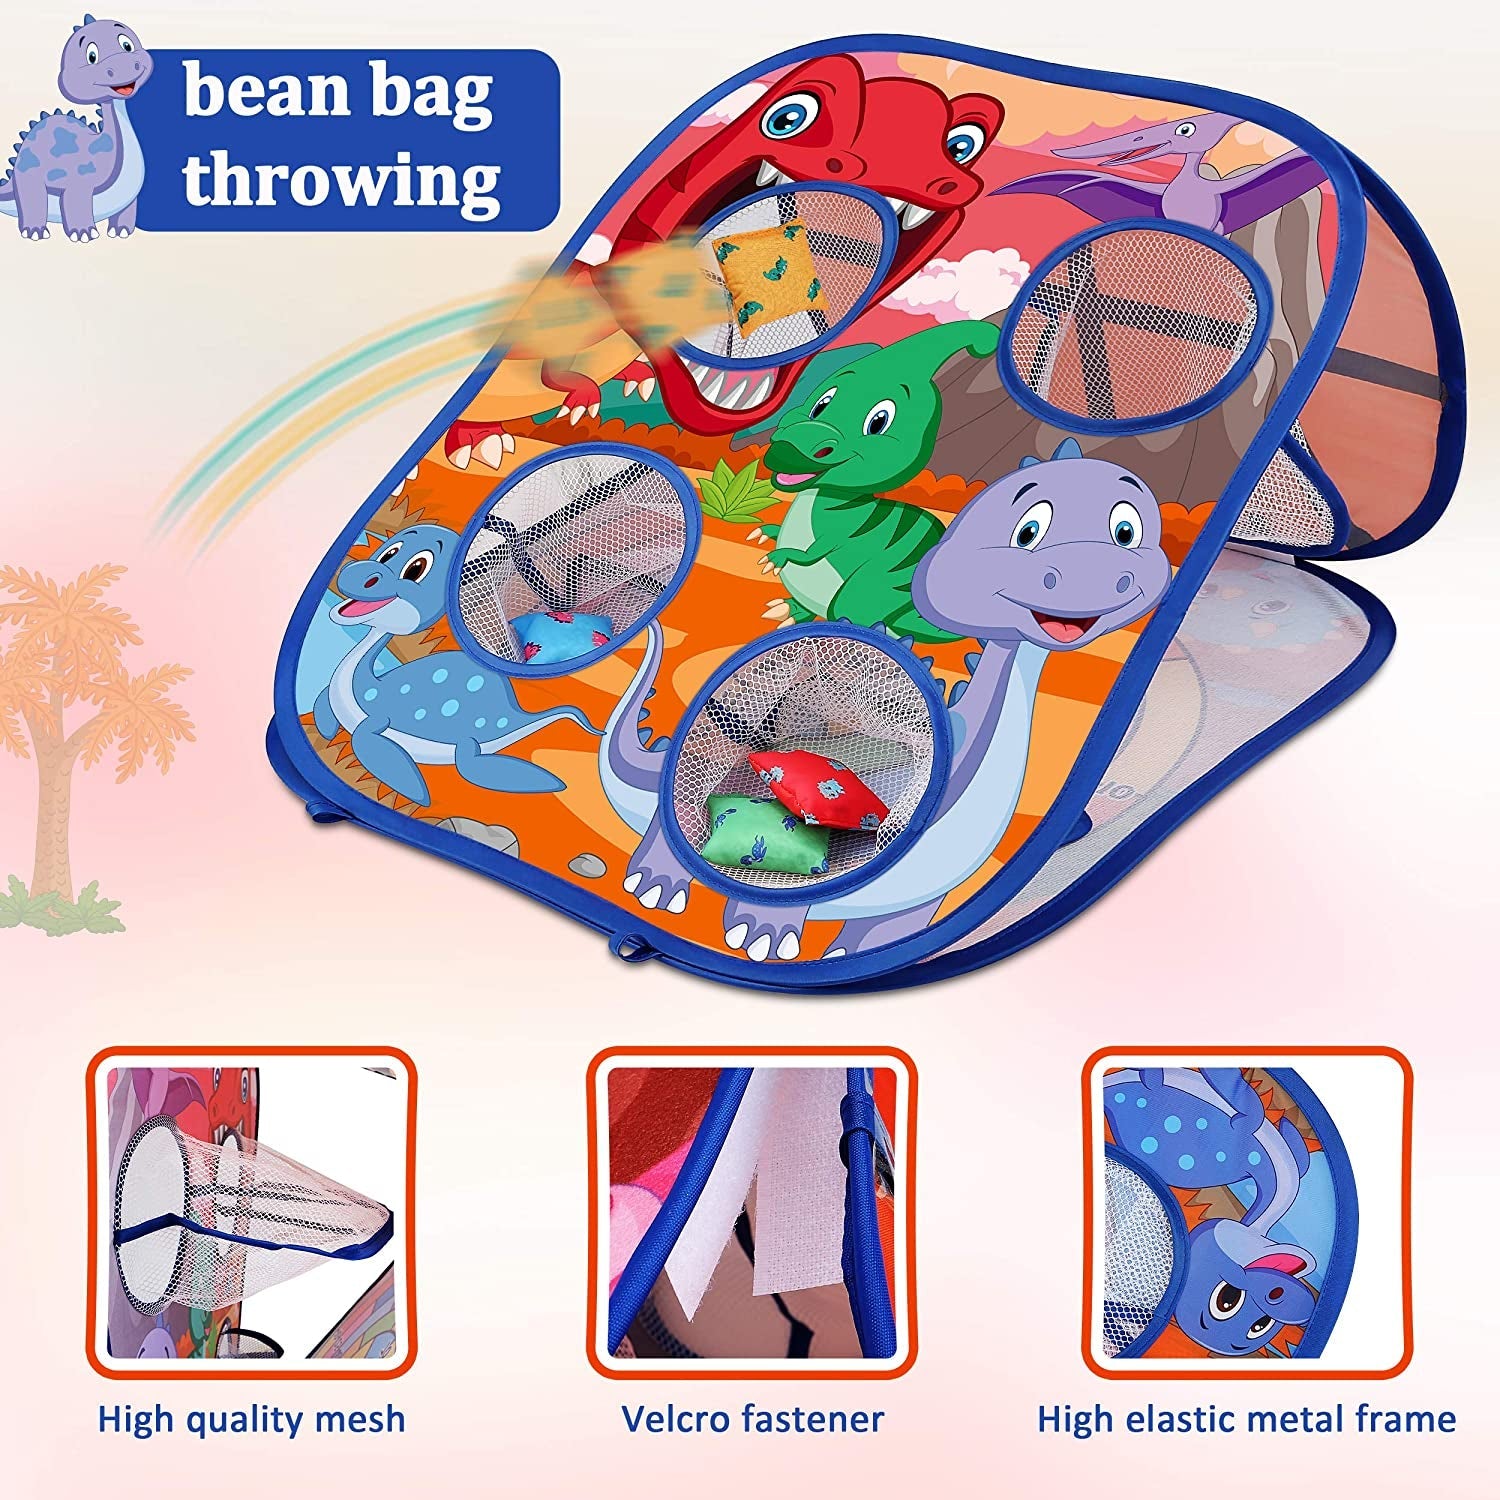 "Fun Animal Bean Bag Toss Game - Perfect Outdoor Party Toy for Kids! Ideal Gift for Boys' Birthdays or Christmas - Suitable for Toddlers Ages 3-6"